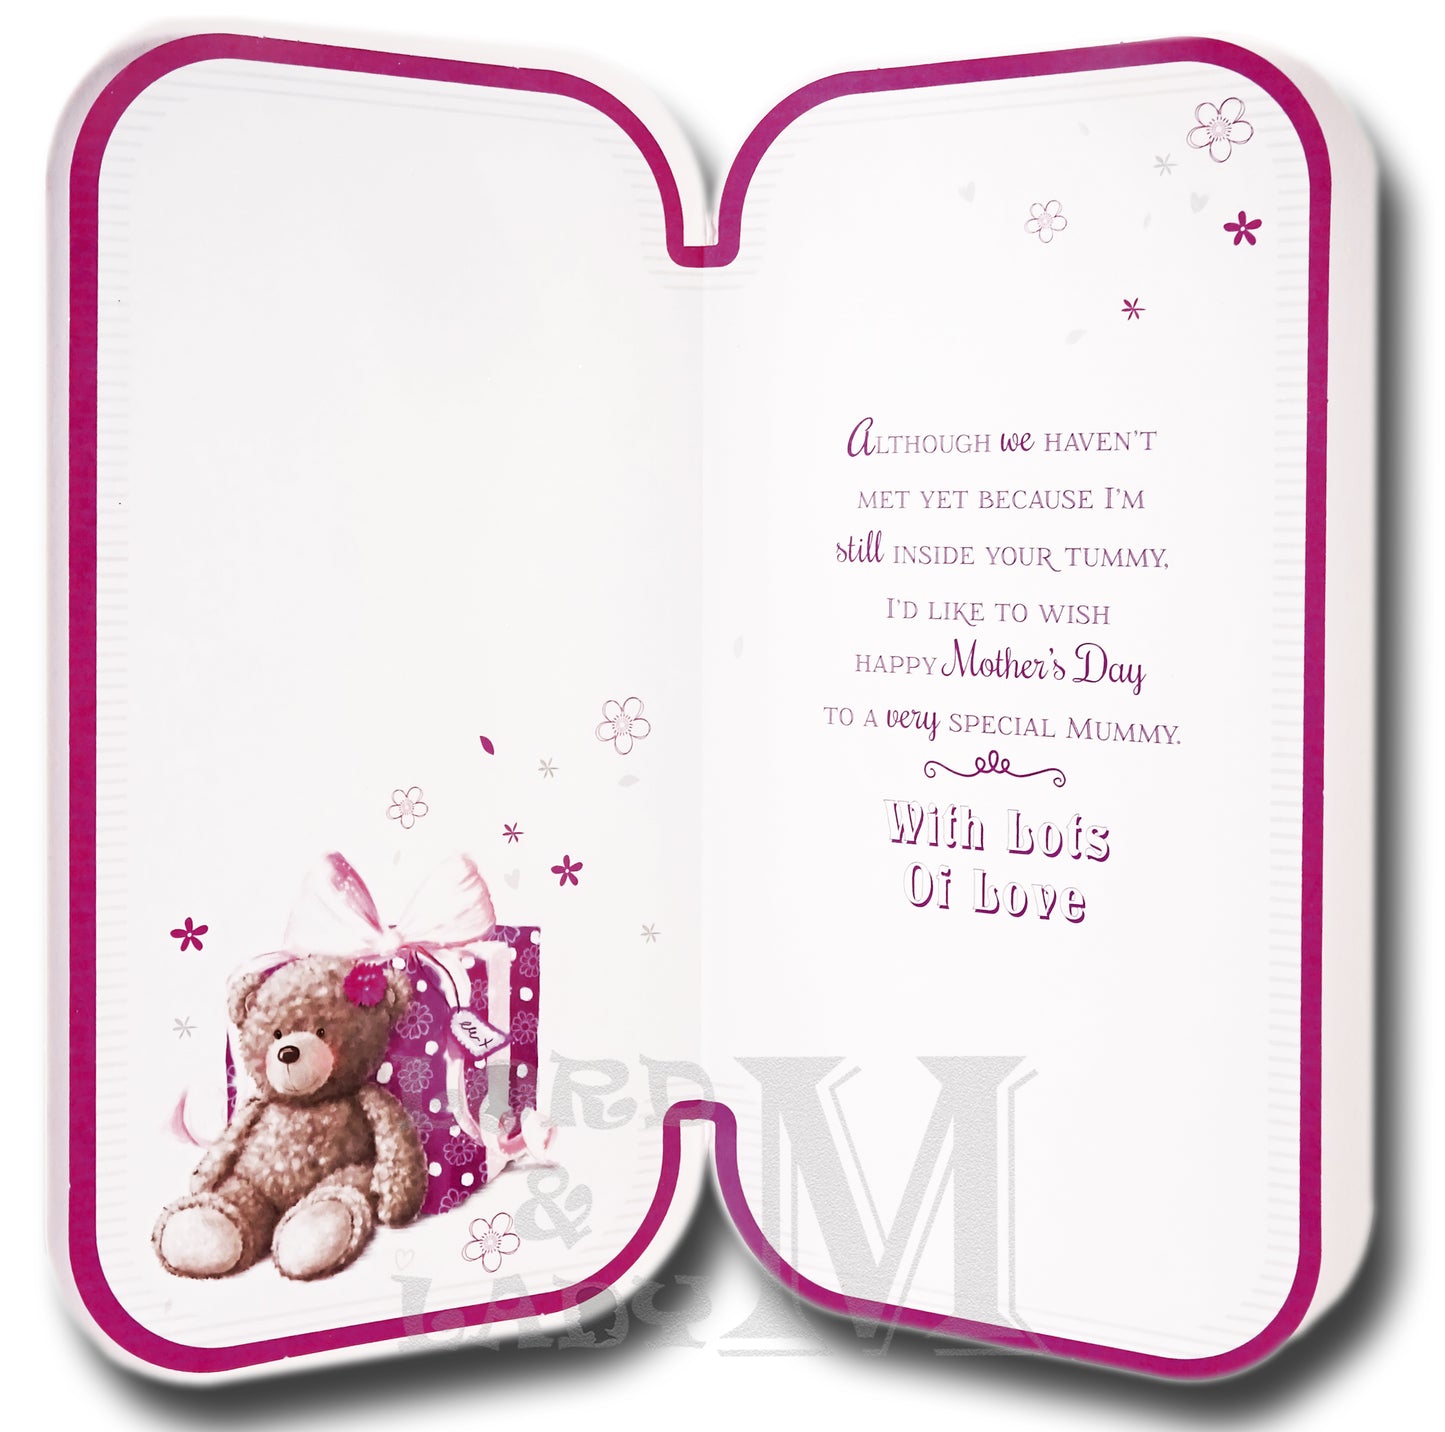 23cm - Mother's Day Wishes With Love From The -BGC